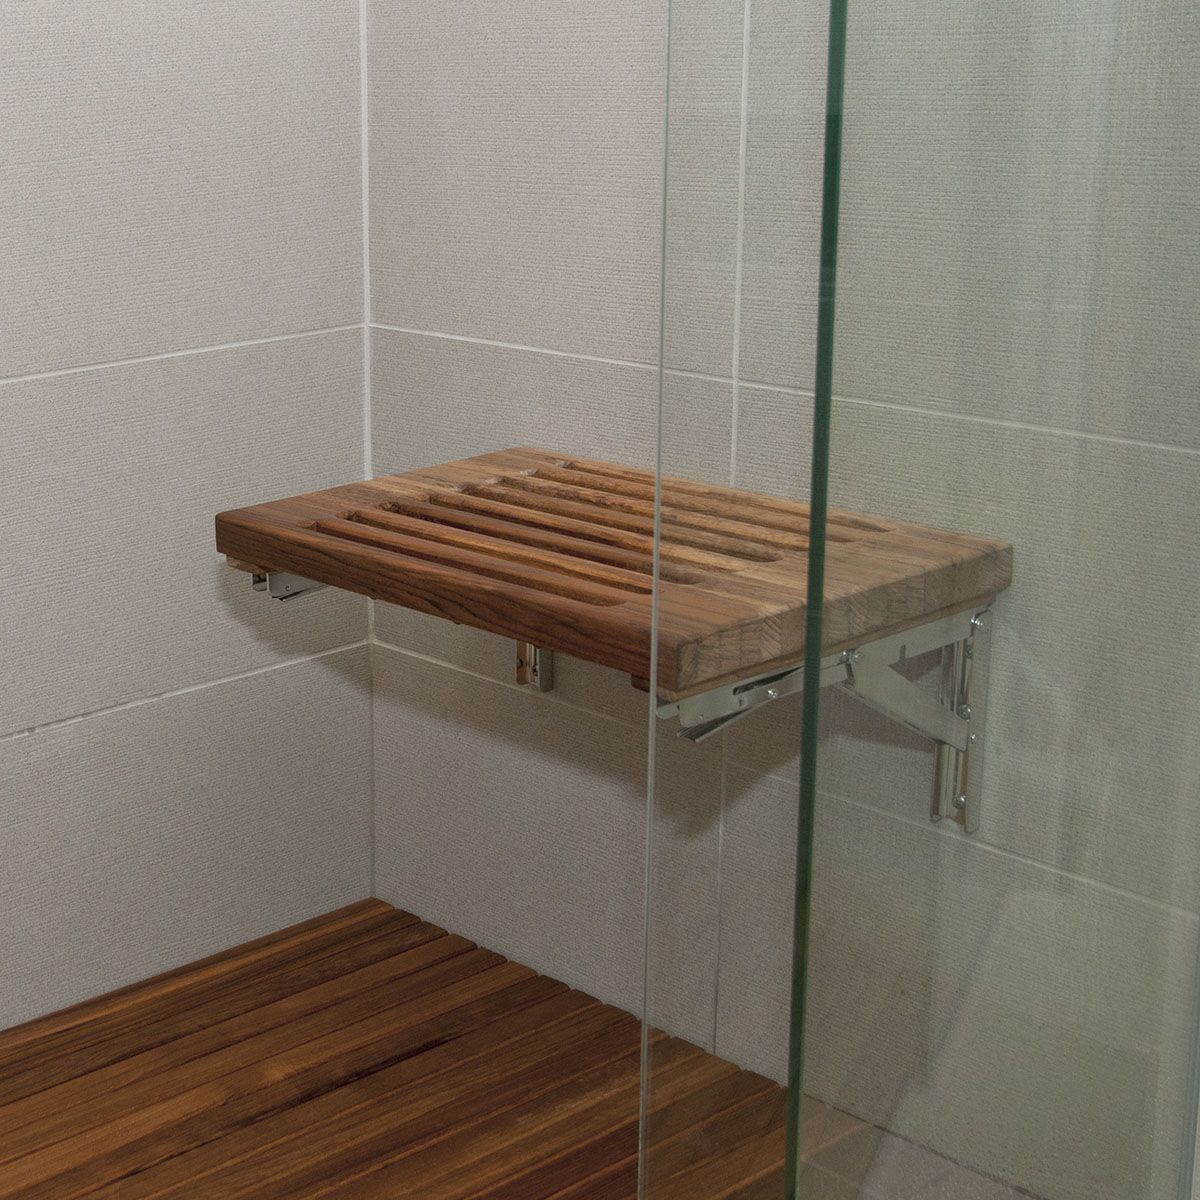 Installed View Of The Teak Wall Mount Bench With Slats Bathroom in sizing 1200 X 1200